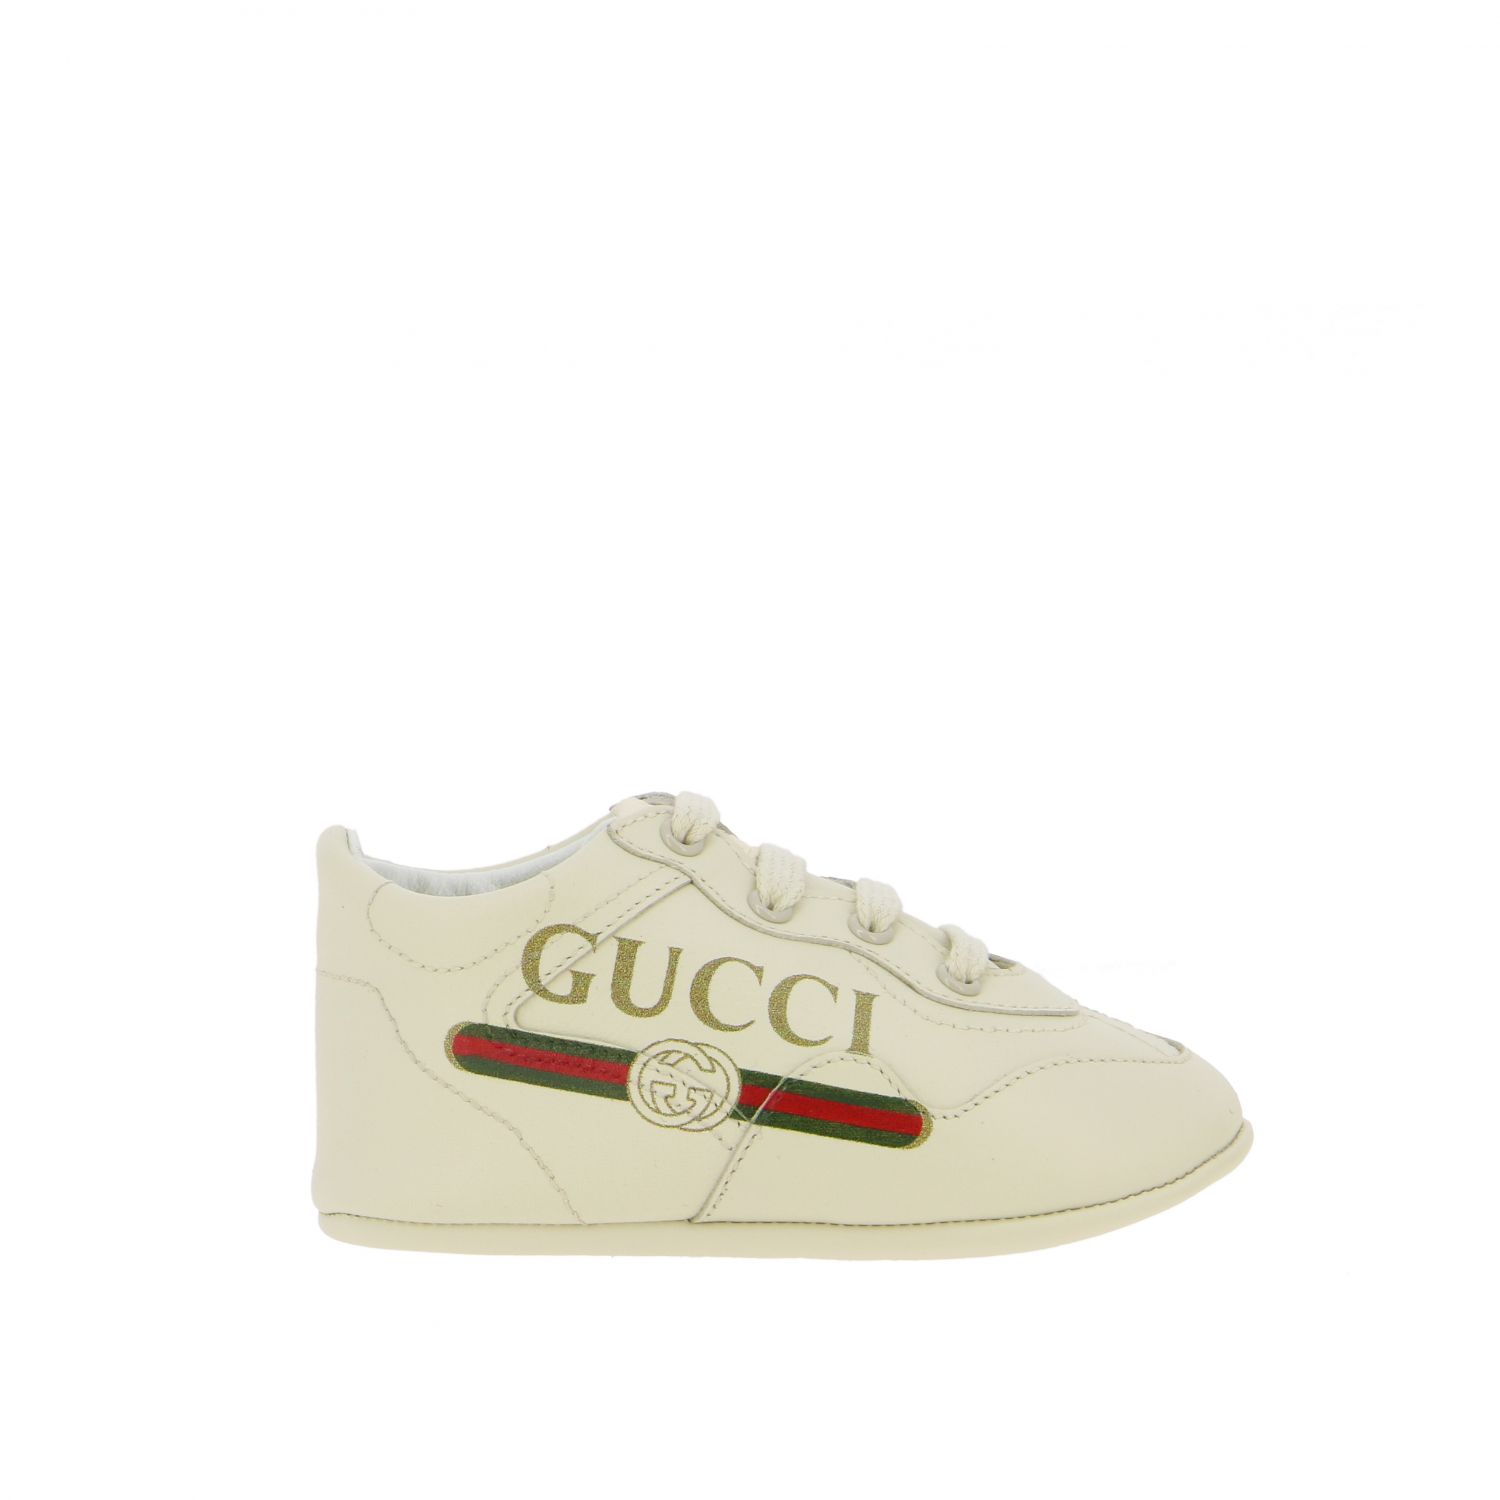 gucci yellow shoes